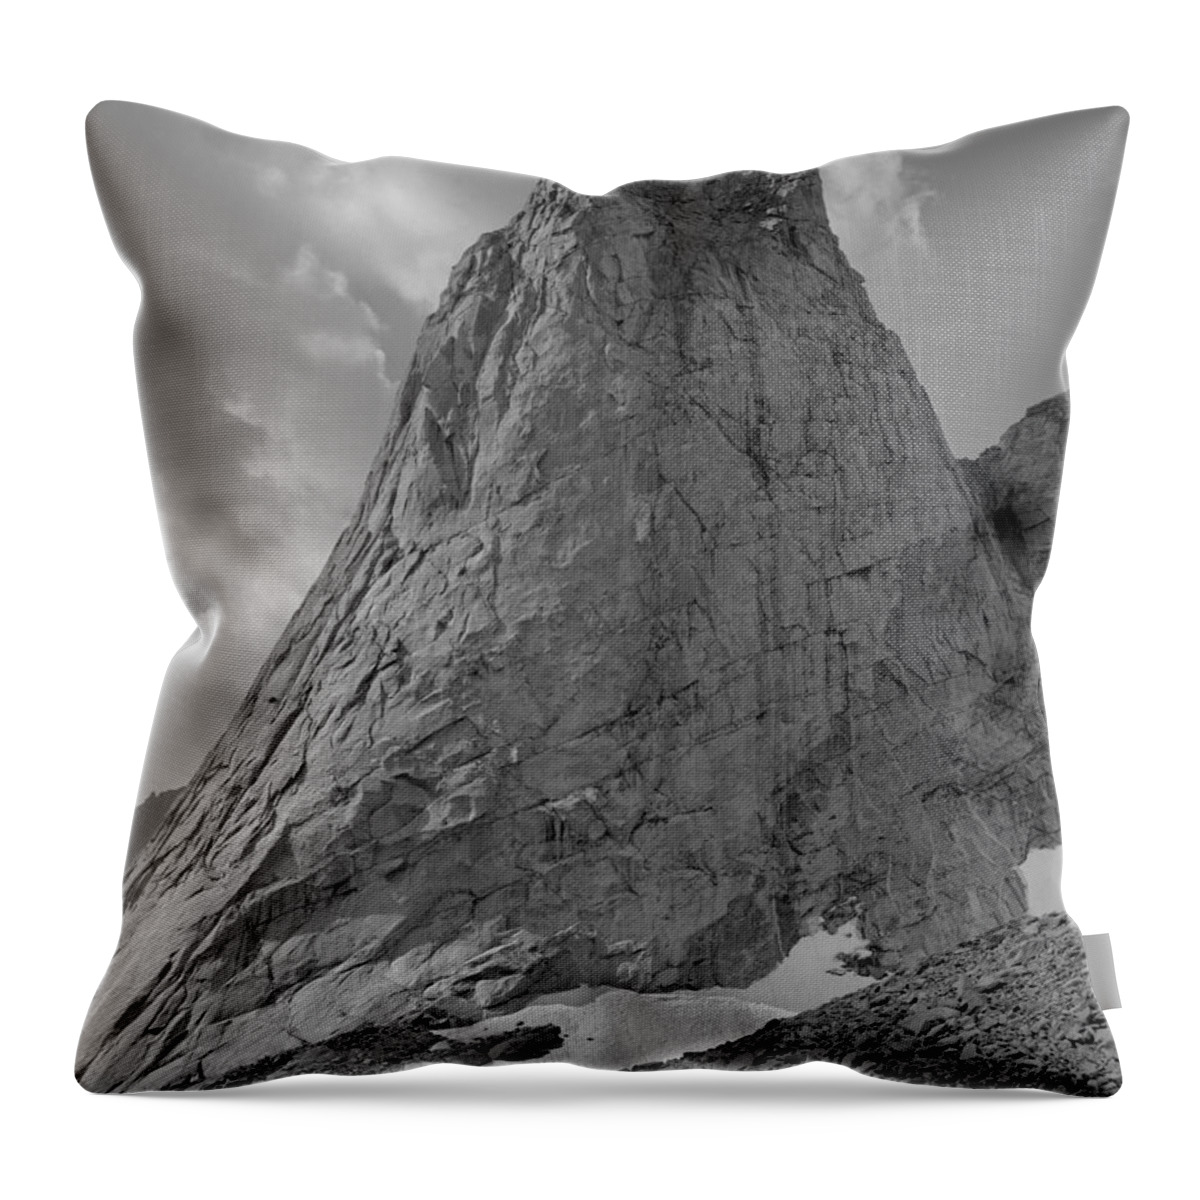 Pingora Peak Throw Pillow featuring the photograph 109649-BW-North Face Pingora Peak, Wind Rivers by Ed Cooper Photography